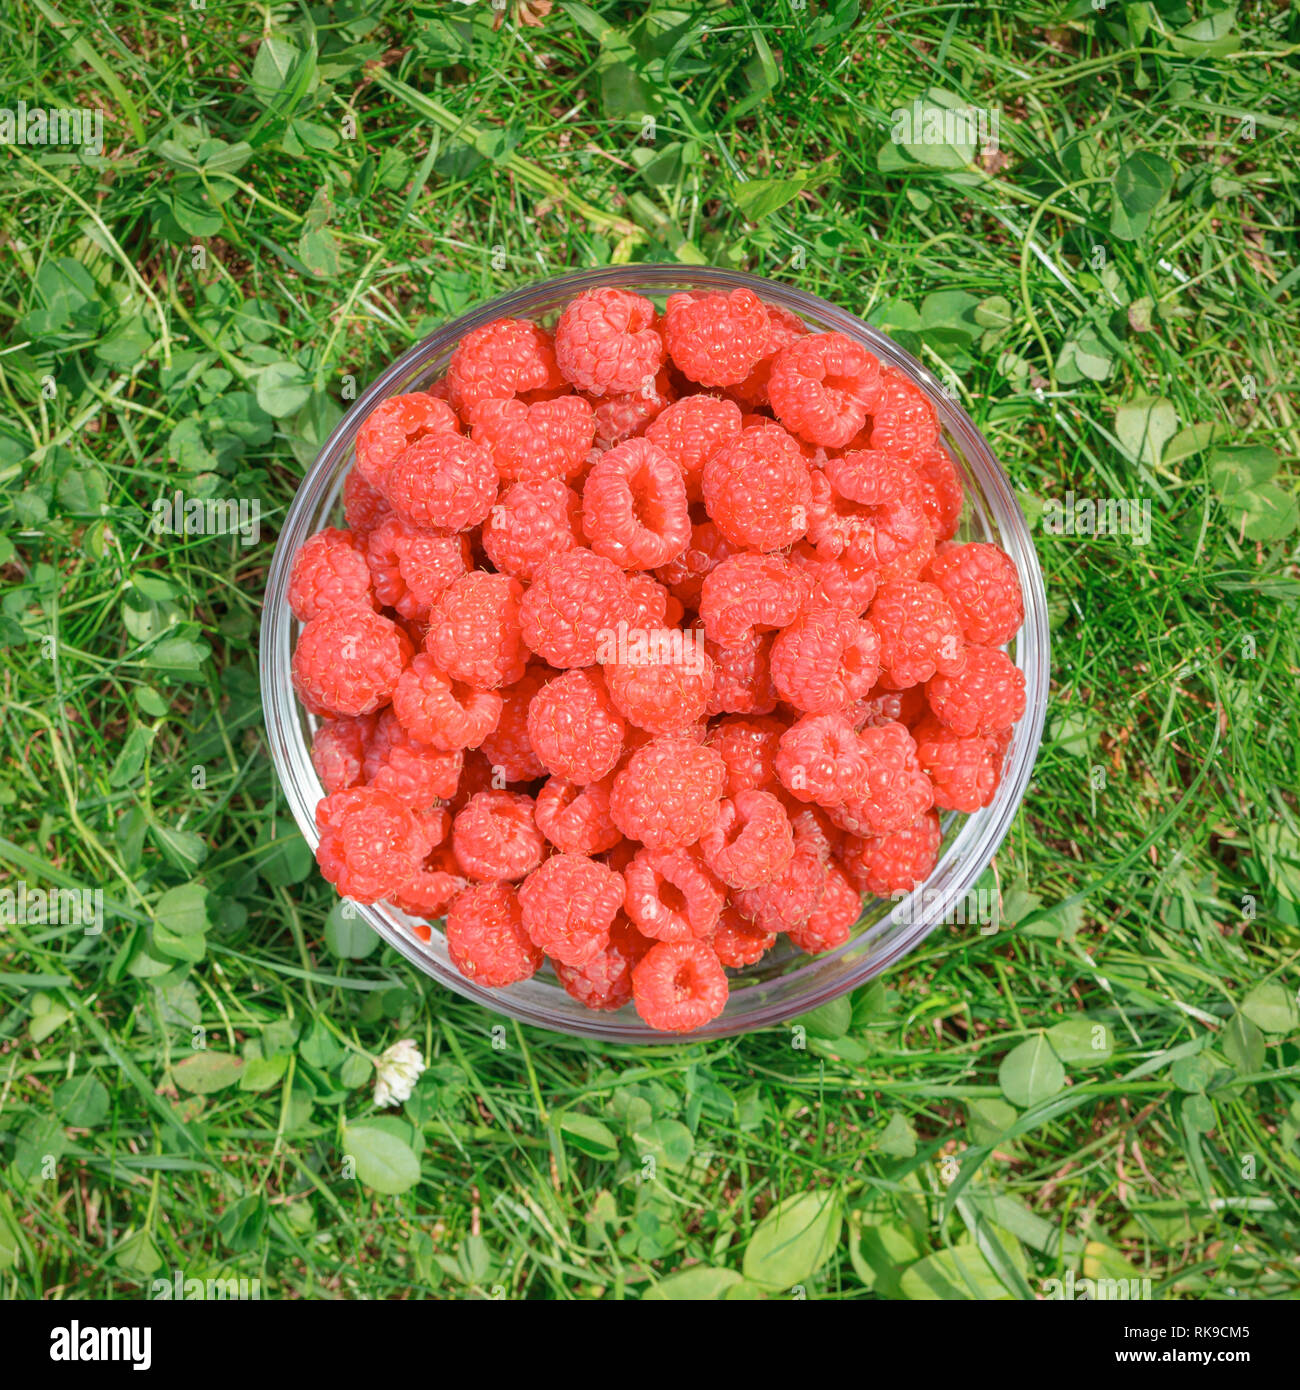 Top view of a bowl of coral colored raspberries on a grass in a summer garden Stock Photo